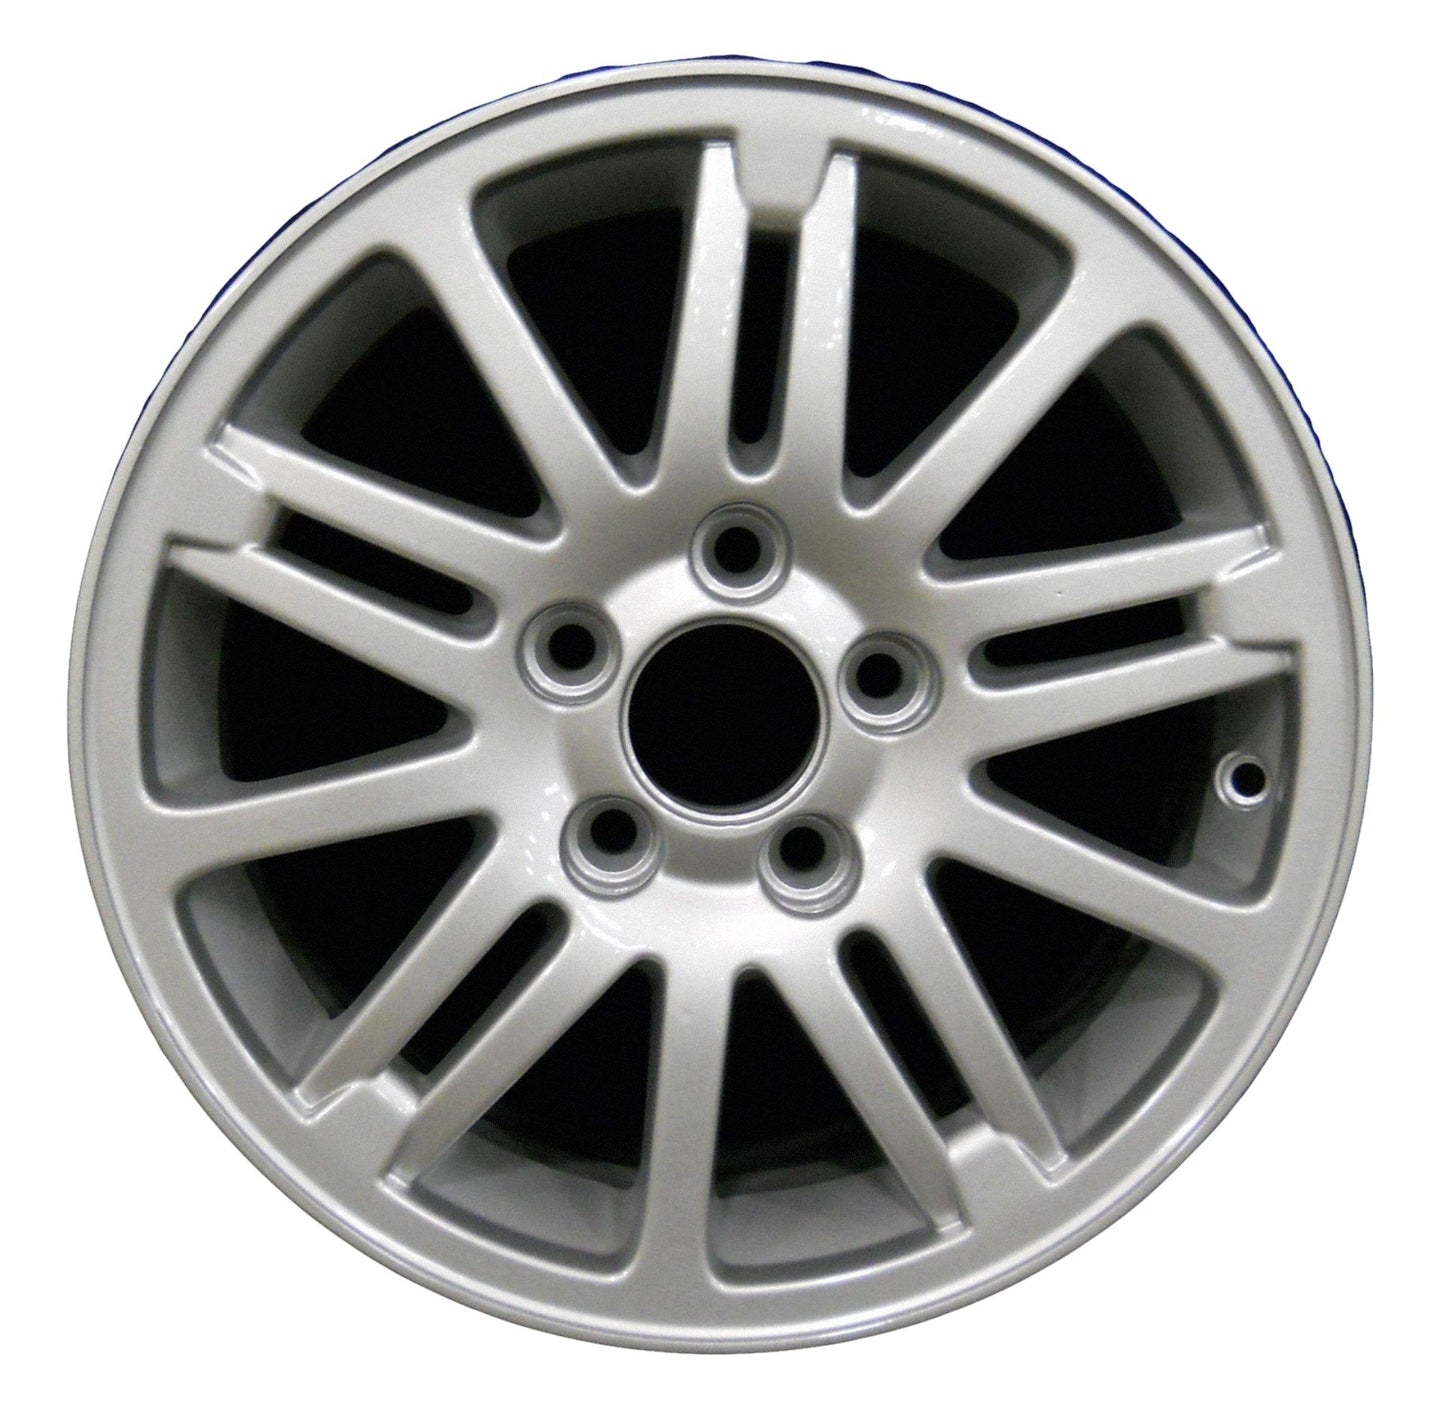 Volvo 60 Series  2003, 2004, 2005, 2006, 2007, 2008, 2009 Factory OEM Car Wheel Size 15x6.5 Alloy WAO.70270.PS15.FF